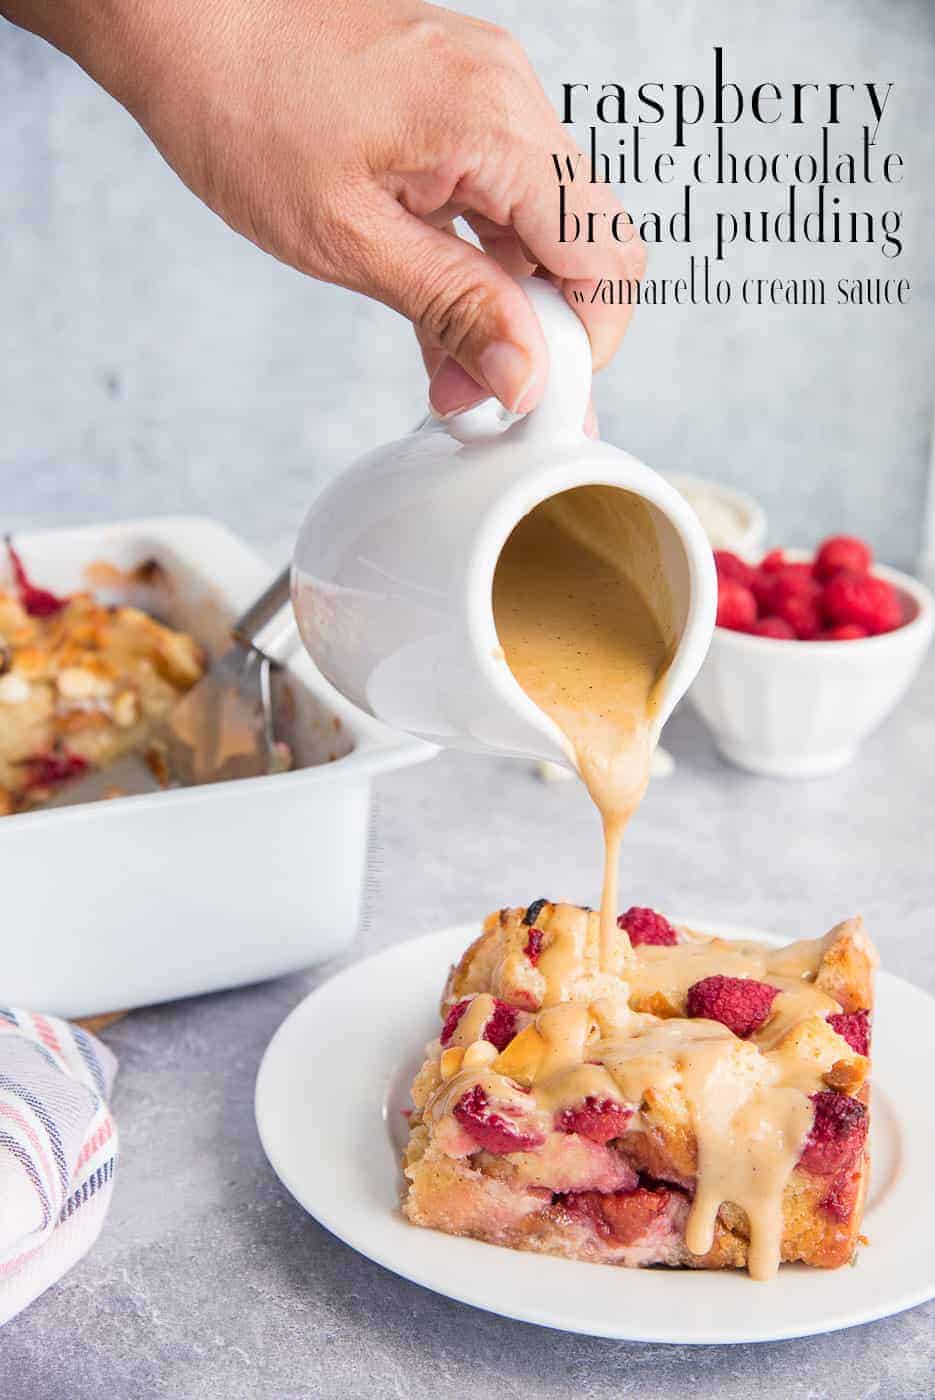 Raspberry White Chocolate Bread Pudding with Amaretto Cream Sauce is a decadent, fruity dessert that is simple to assemble and can bake while you prepare tonight's dinner. Bonus: it also tastes amazing as a breakfast or brunch dish. #raspberrybreadpudding #whitechocolatebreadpudding #breadpudding #breadpuddingrecipe #baking #dayoldbreadrecipe #challah #pansobao #frenchbread #bakingrecipes #whitechocolaterecipes #summerdessert #dessert #brunch #breakfast #breadpuddingdessert #amarettosauce via @ediblesense